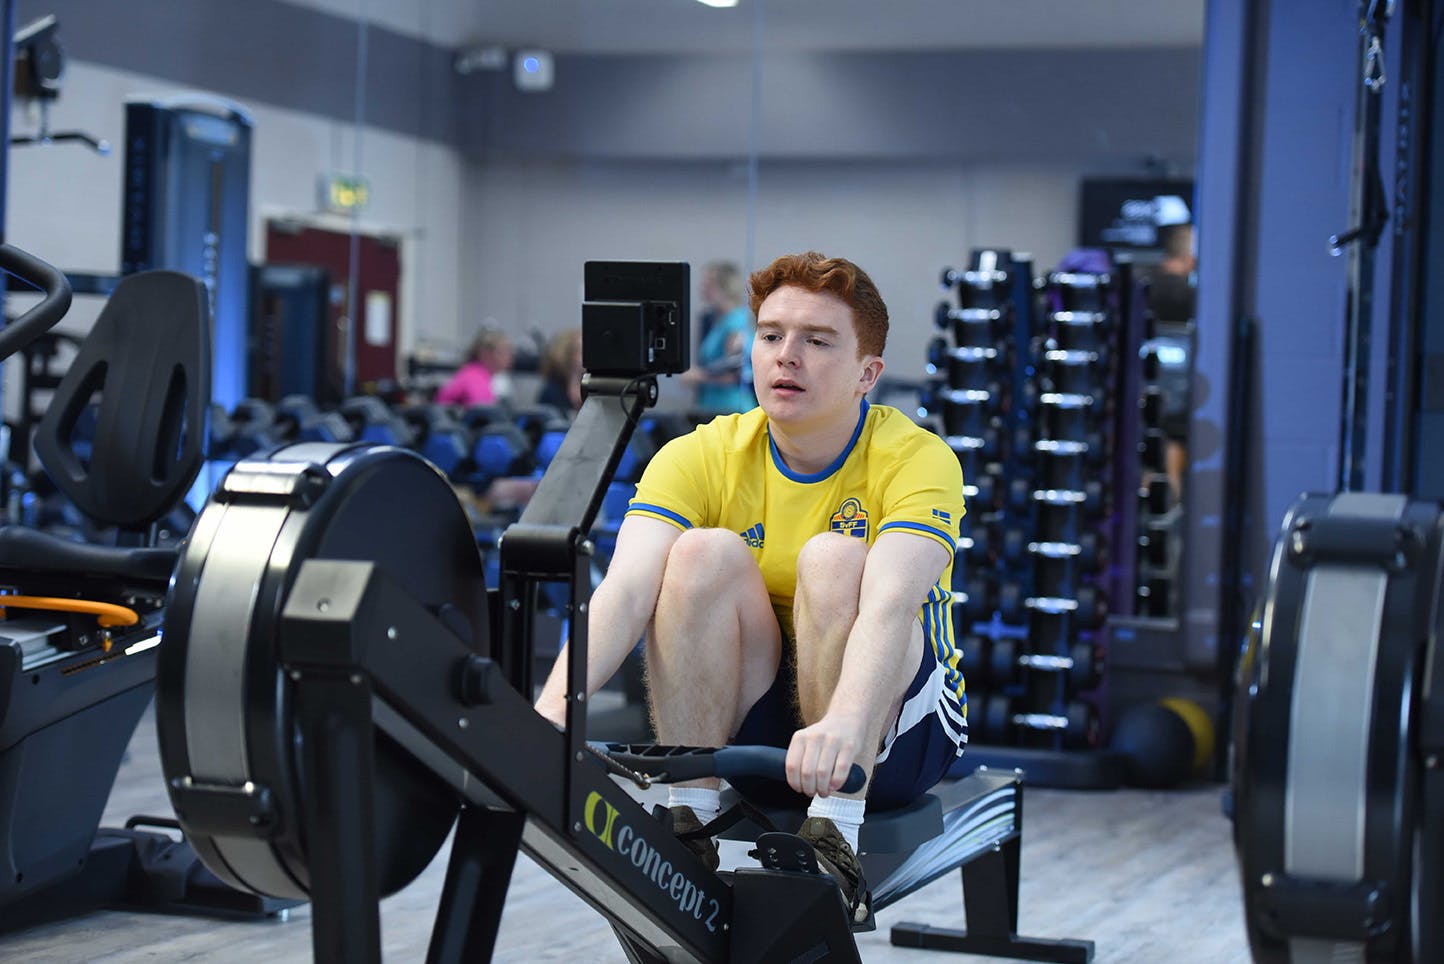 Student on the rowing machine in the gym